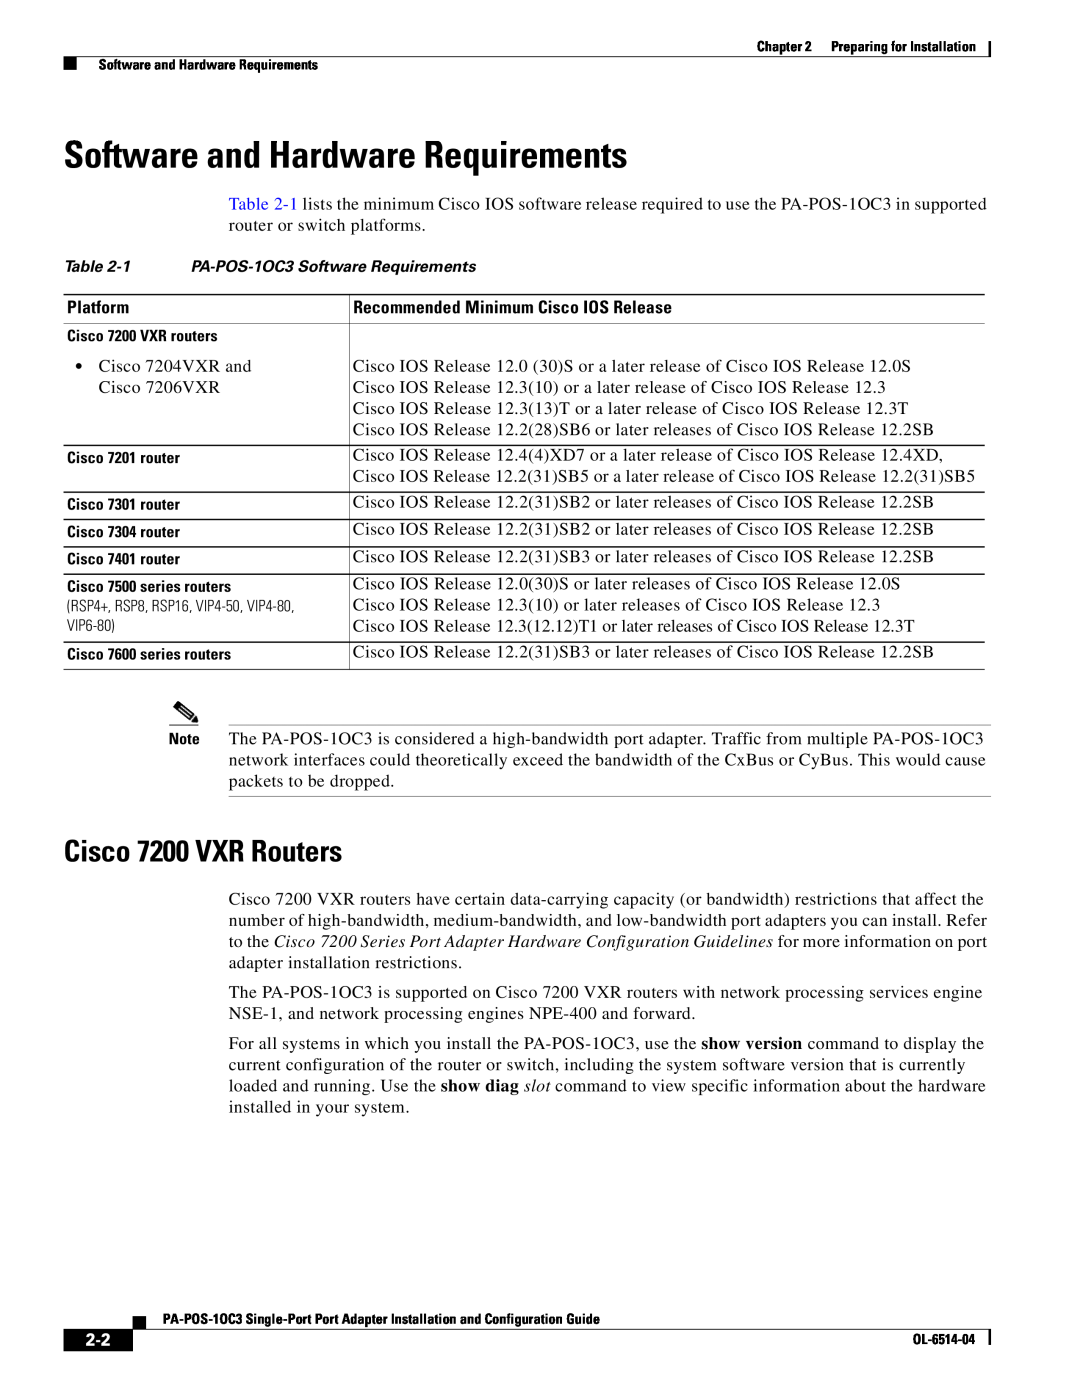 Cisco Systems PA-POS-2OC3, PA-POS-1OC3 manual Software and Hardware Requirements, Cisco 7200 VXR Routers, Platform 